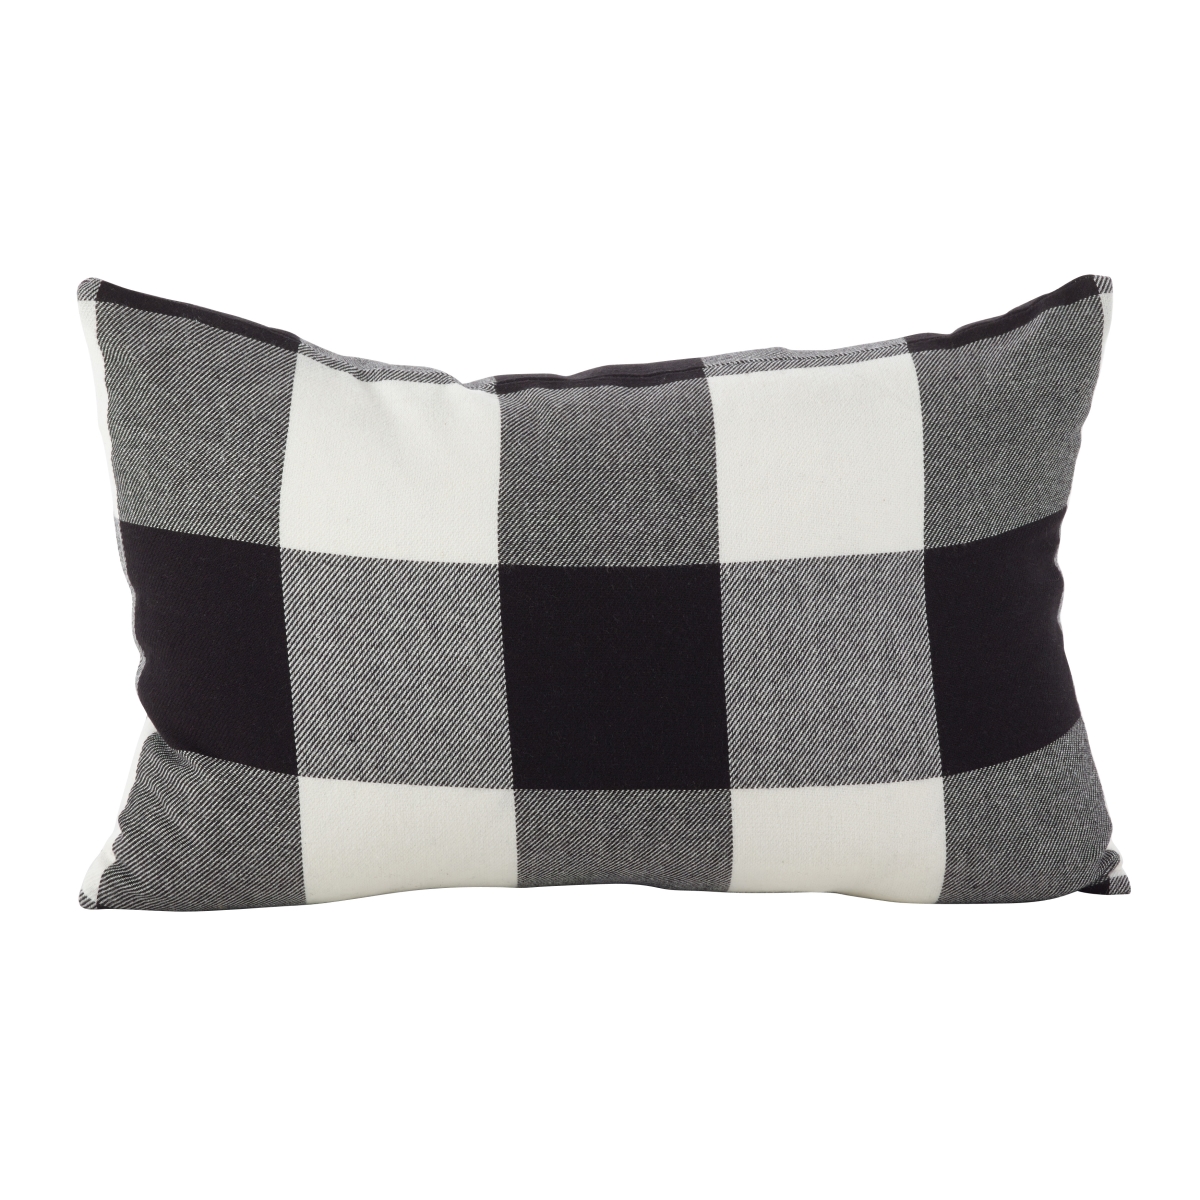 Picture of SARO 9025P.BK1320B 13 x 20 in. Rectangle Buffalo Check Plaid Design Cotton Down Filled Throw Pillow  Black